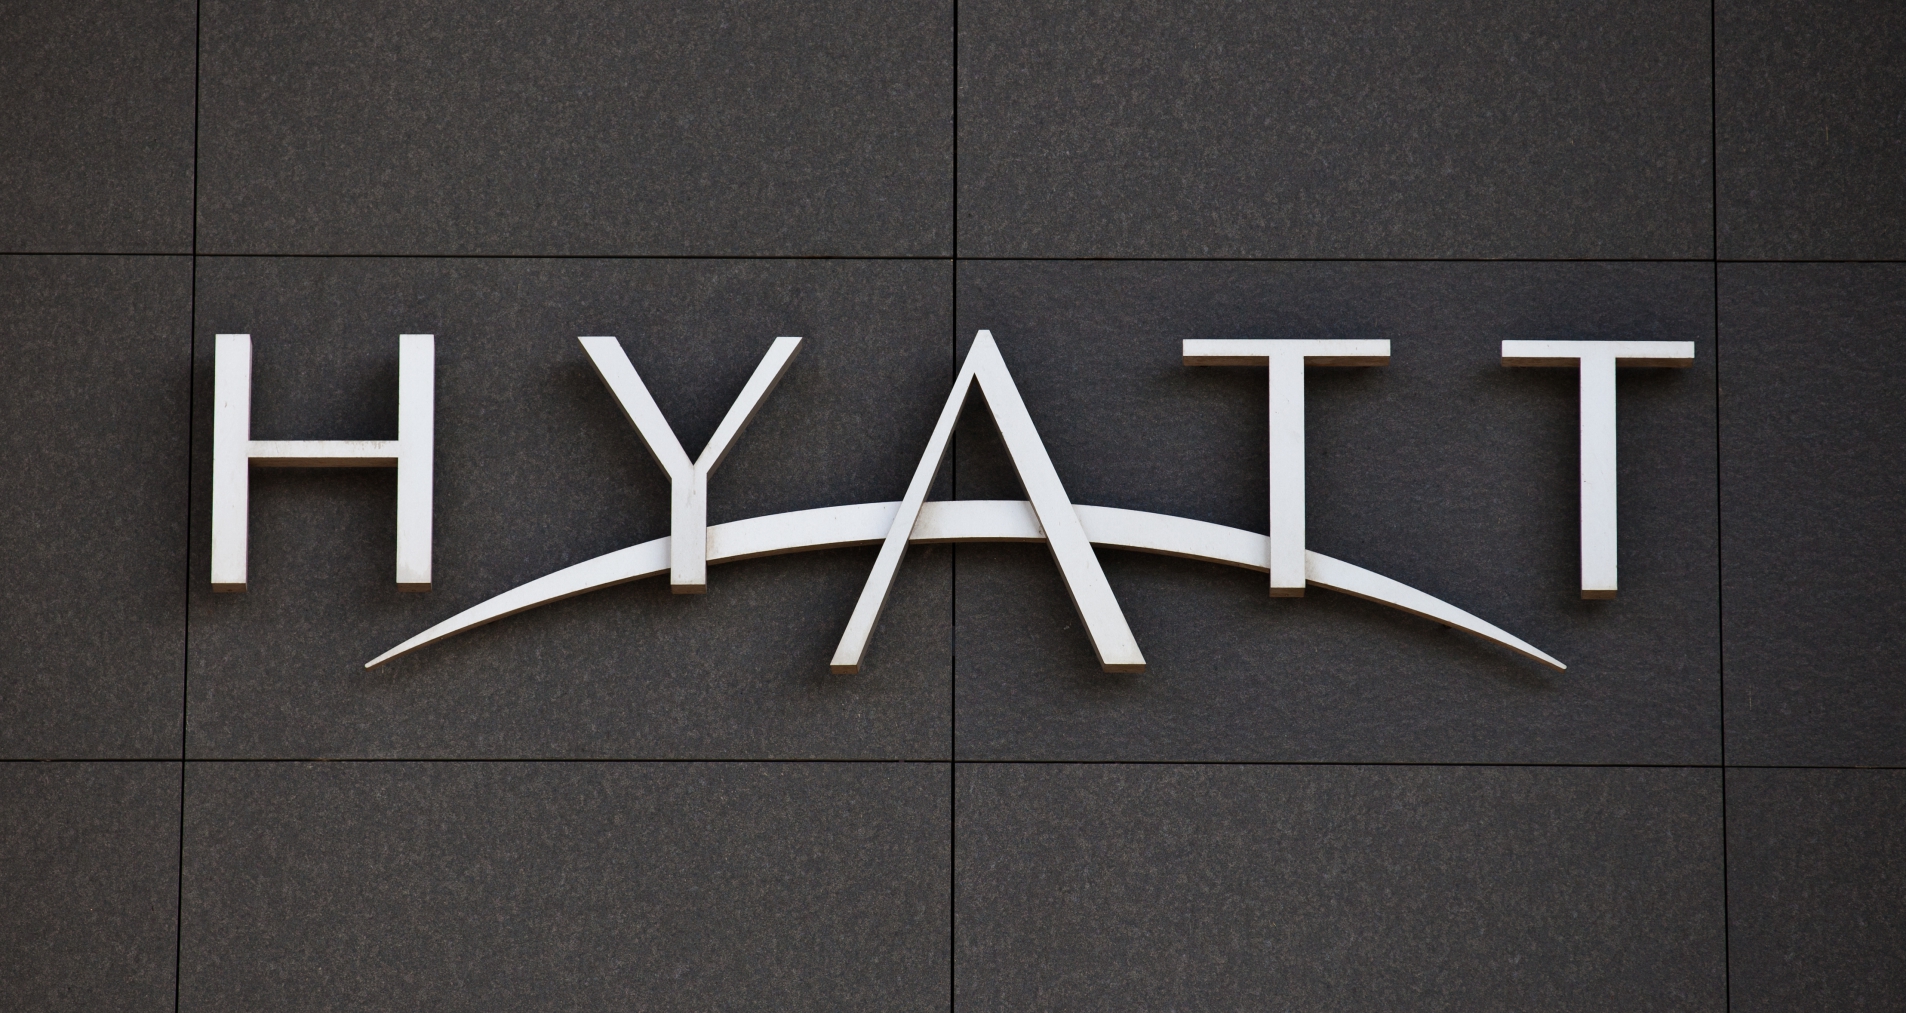 Chase's Hyatt Credit Card Now Open For Referrals, Offering 10,000 Points Per Referral